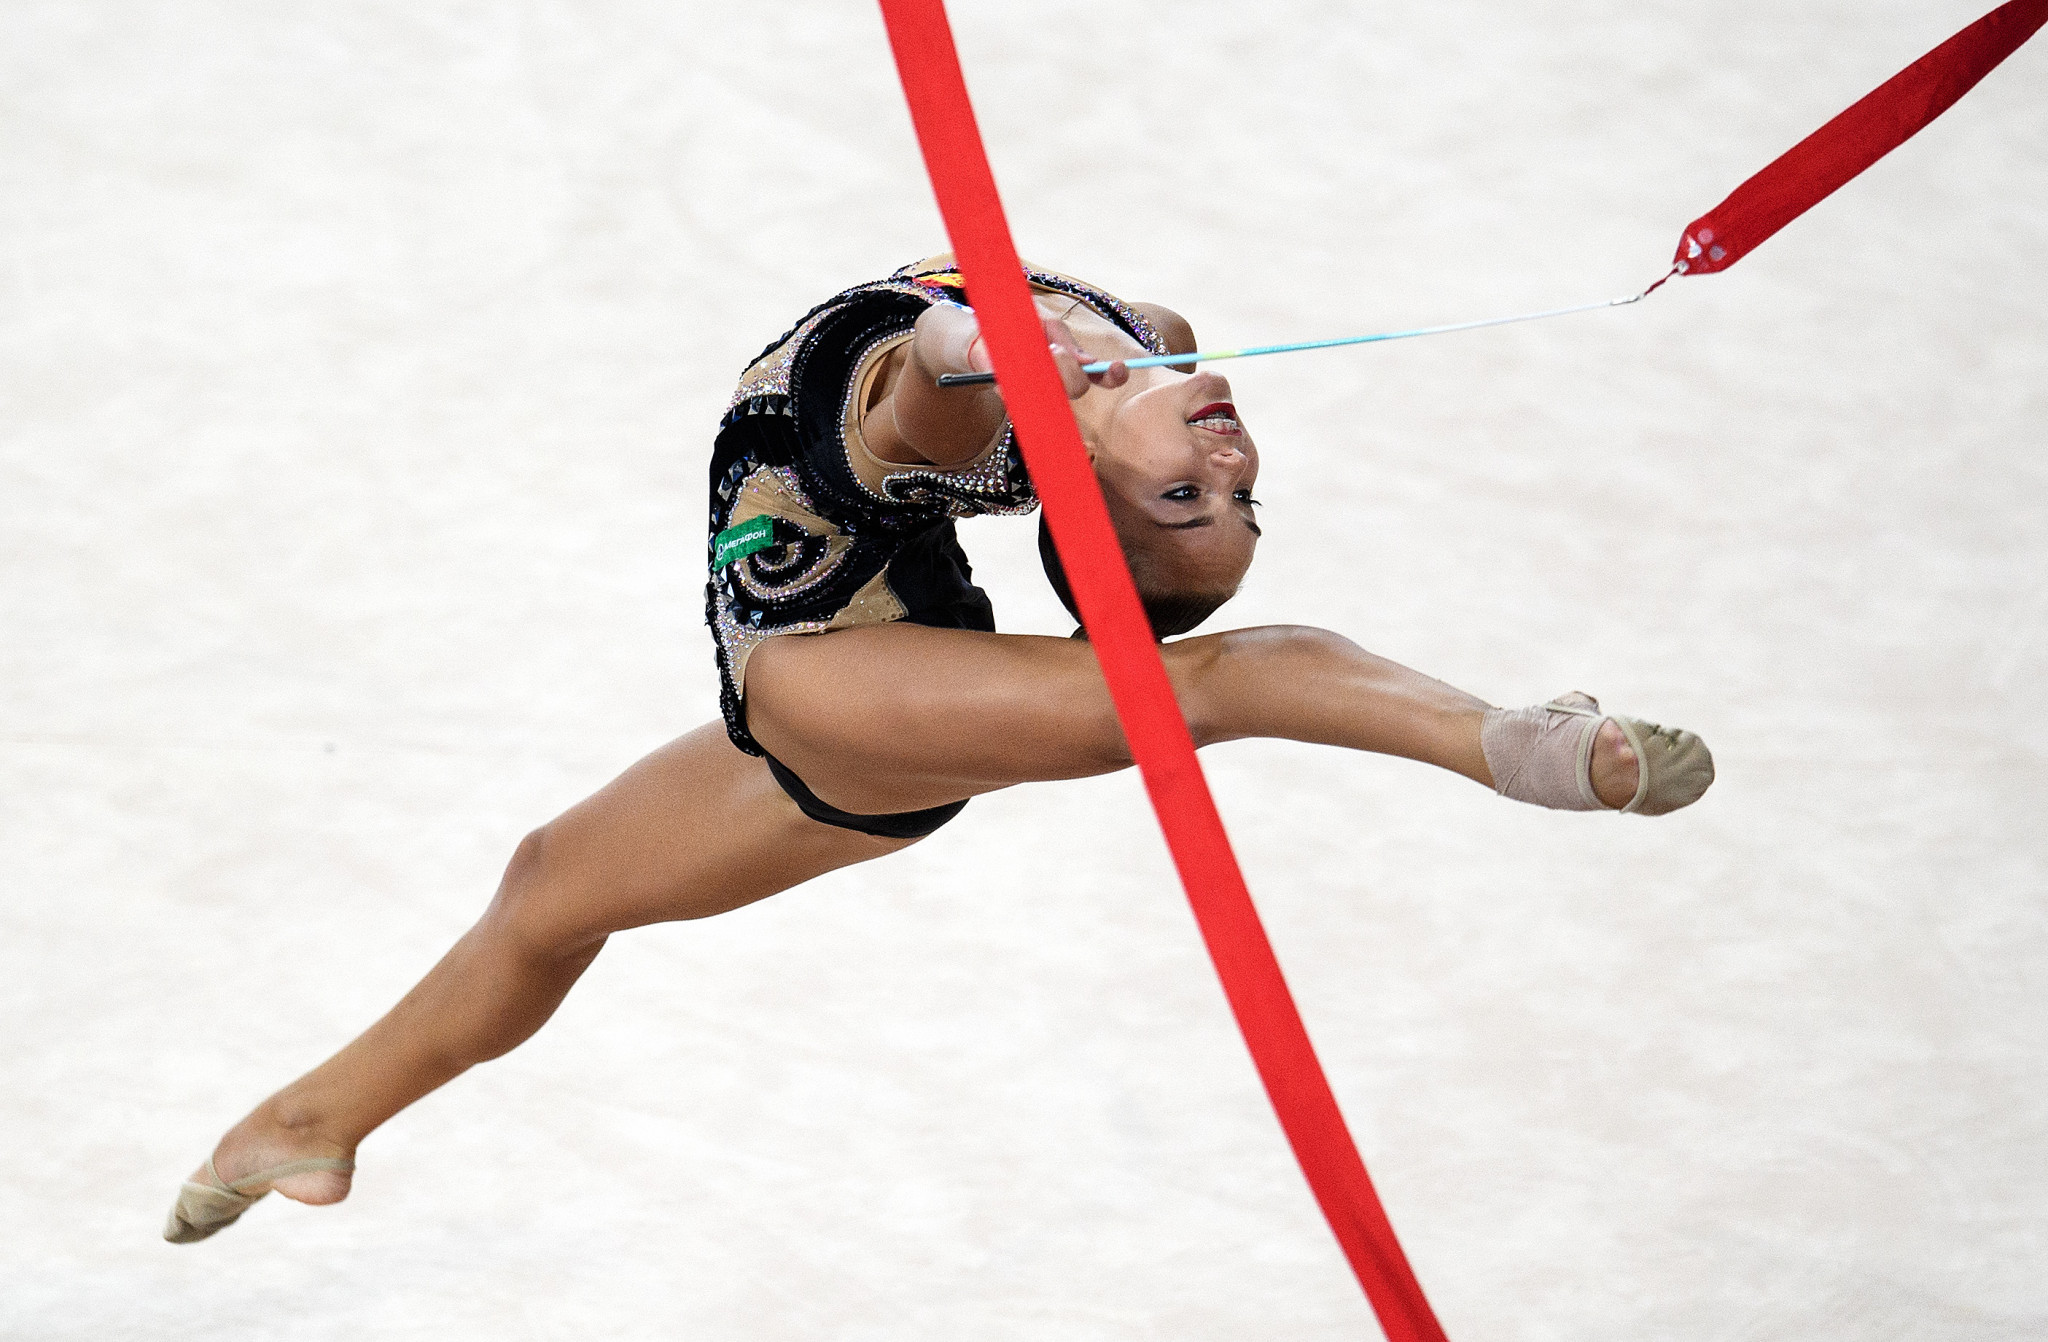 Dina Averina also ended with two individual gold medals as the event in Baku concluded ©Getty Images